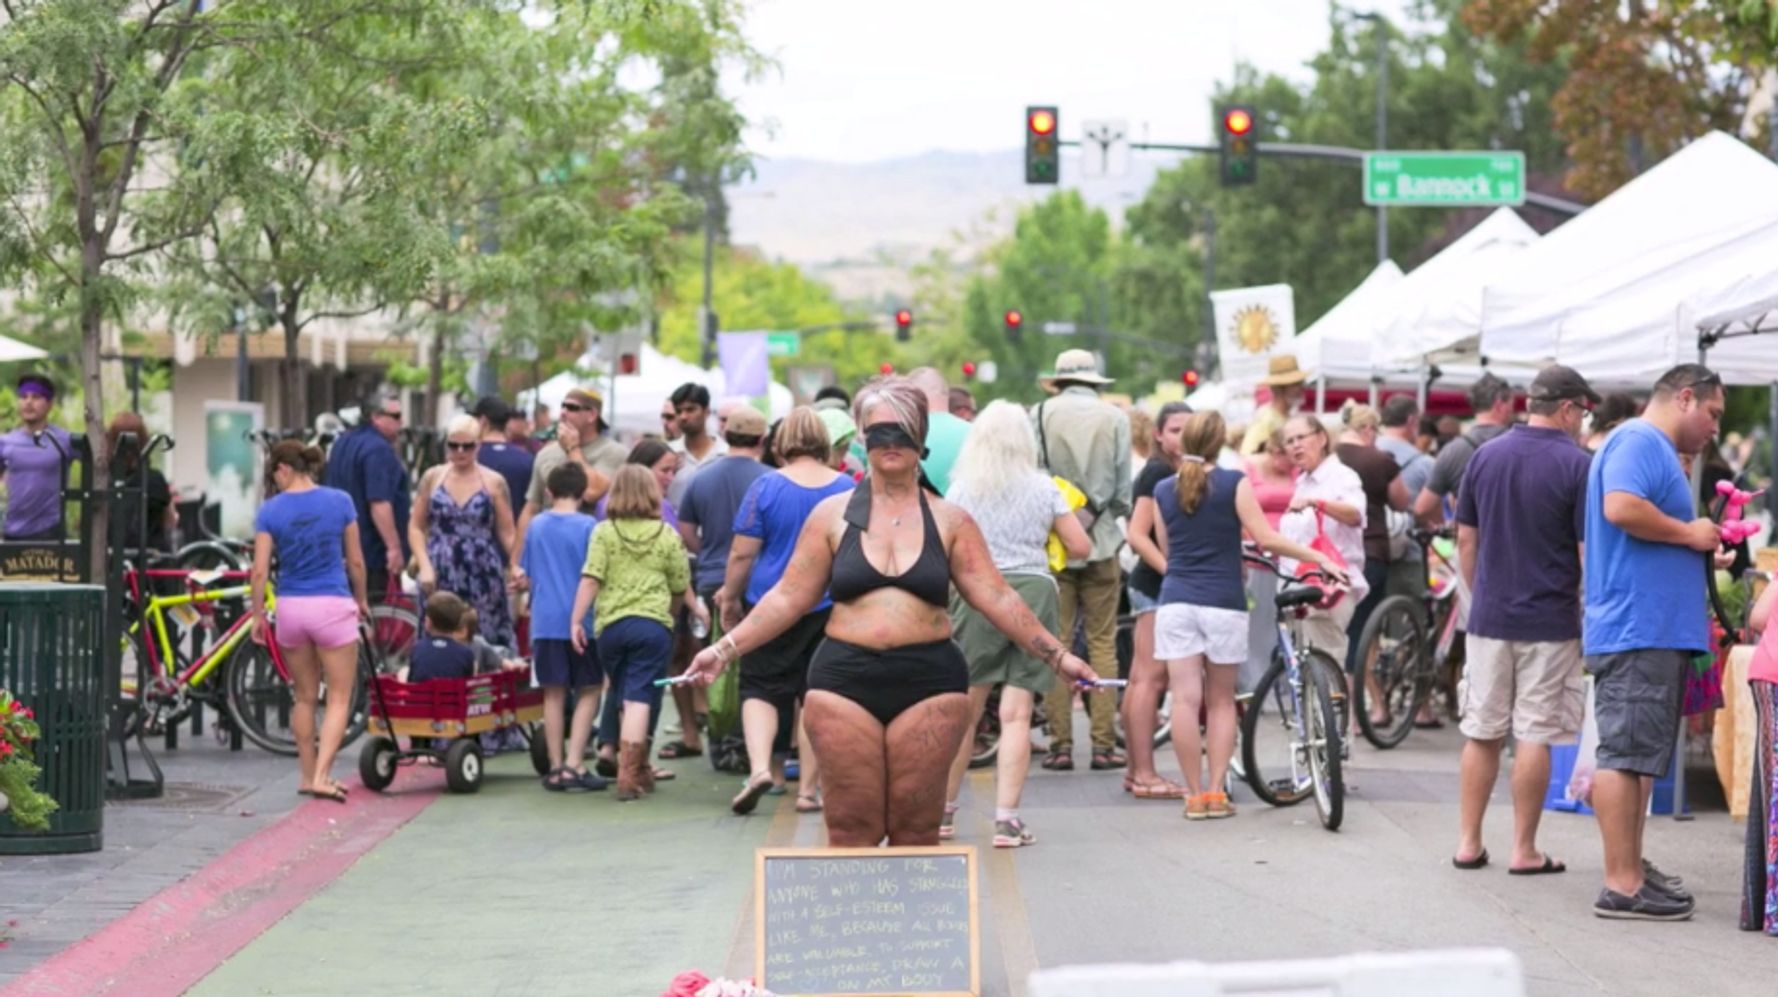 Woman Undressed In Public To Show That 'All Bodies Are Valuable' ...